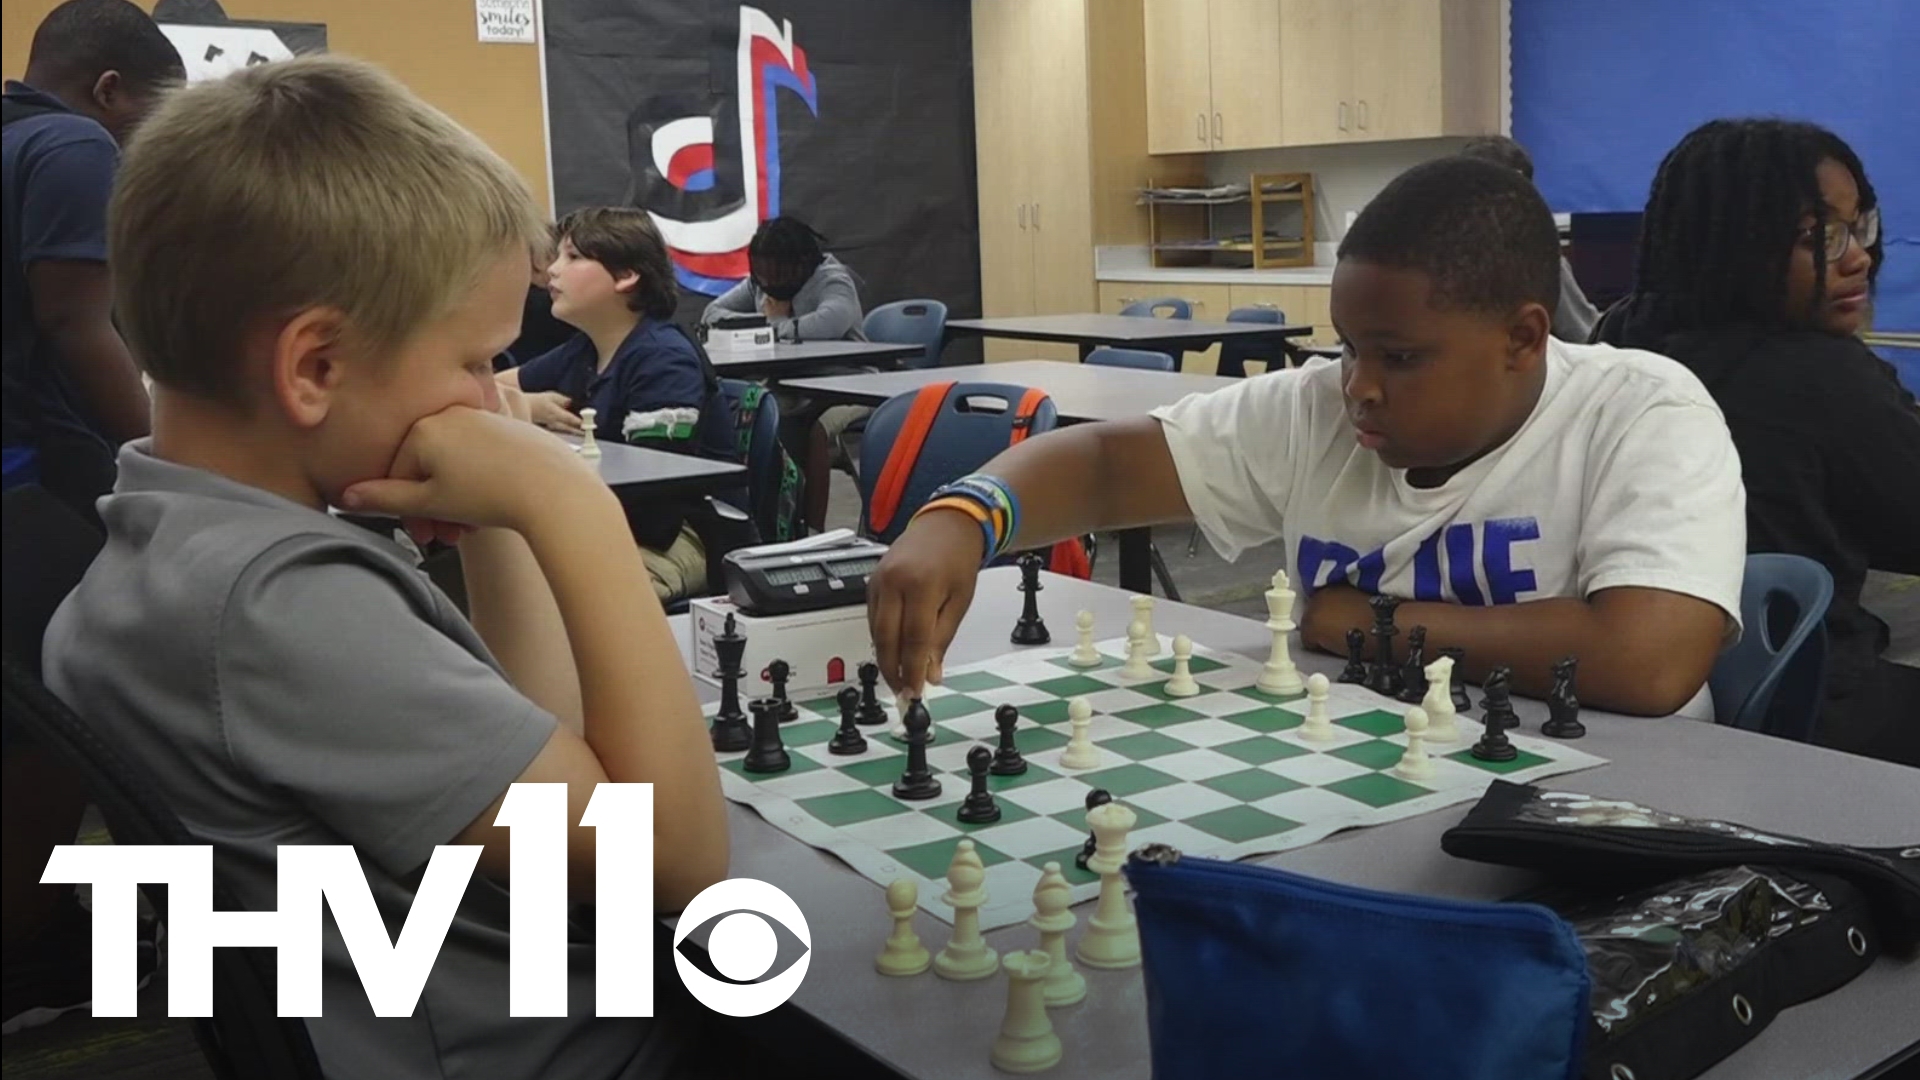 A Little Rock elementary school has implemented chess into its daily curriculum, and it’s paying off with higher test scores and improved classroom behavior.